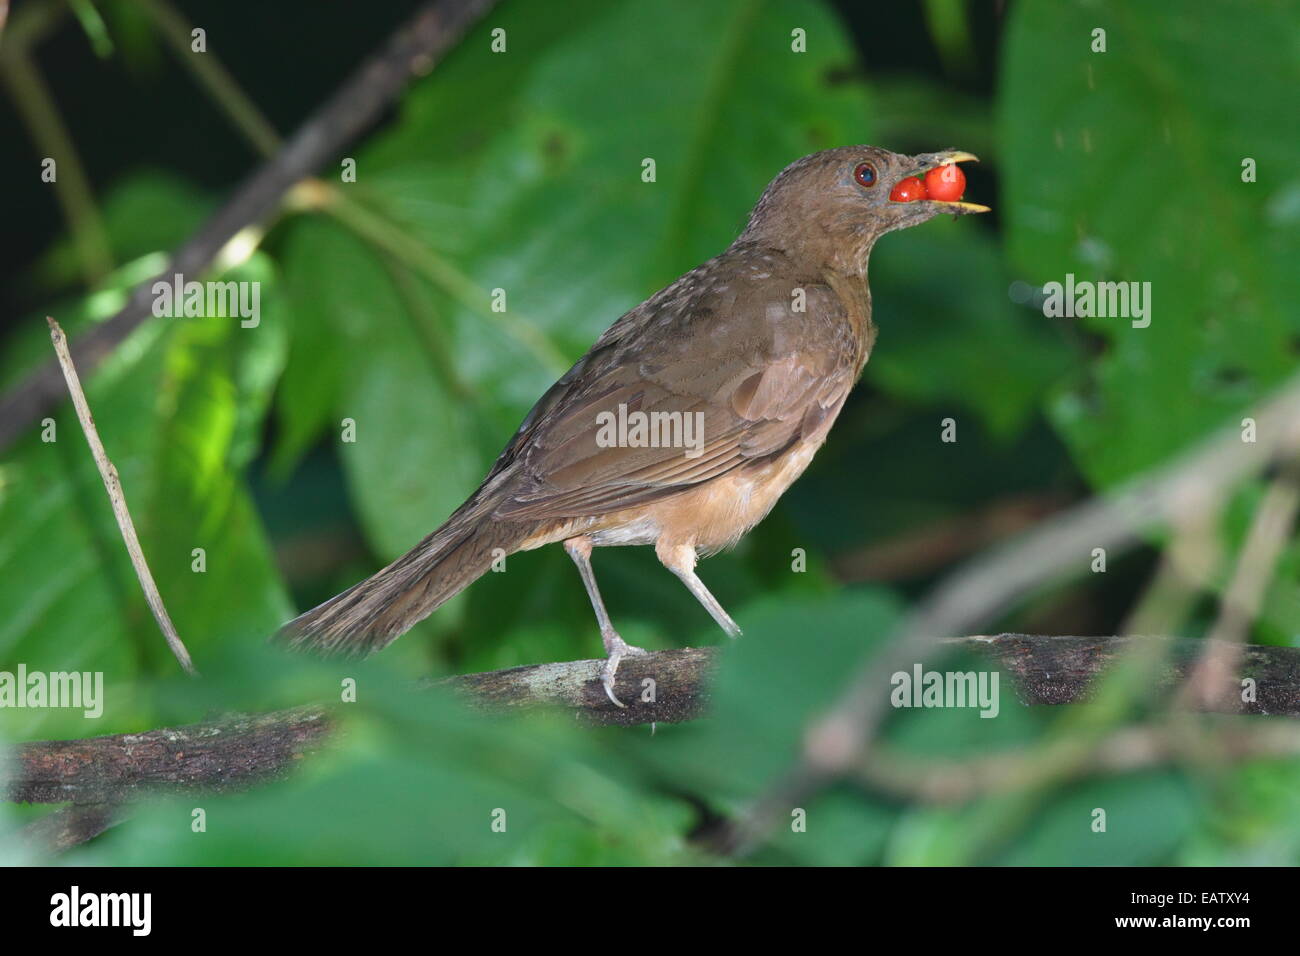 Costa Rica's national bird, the clay colored robin, Turdus grayi, foraging. Stock Photo